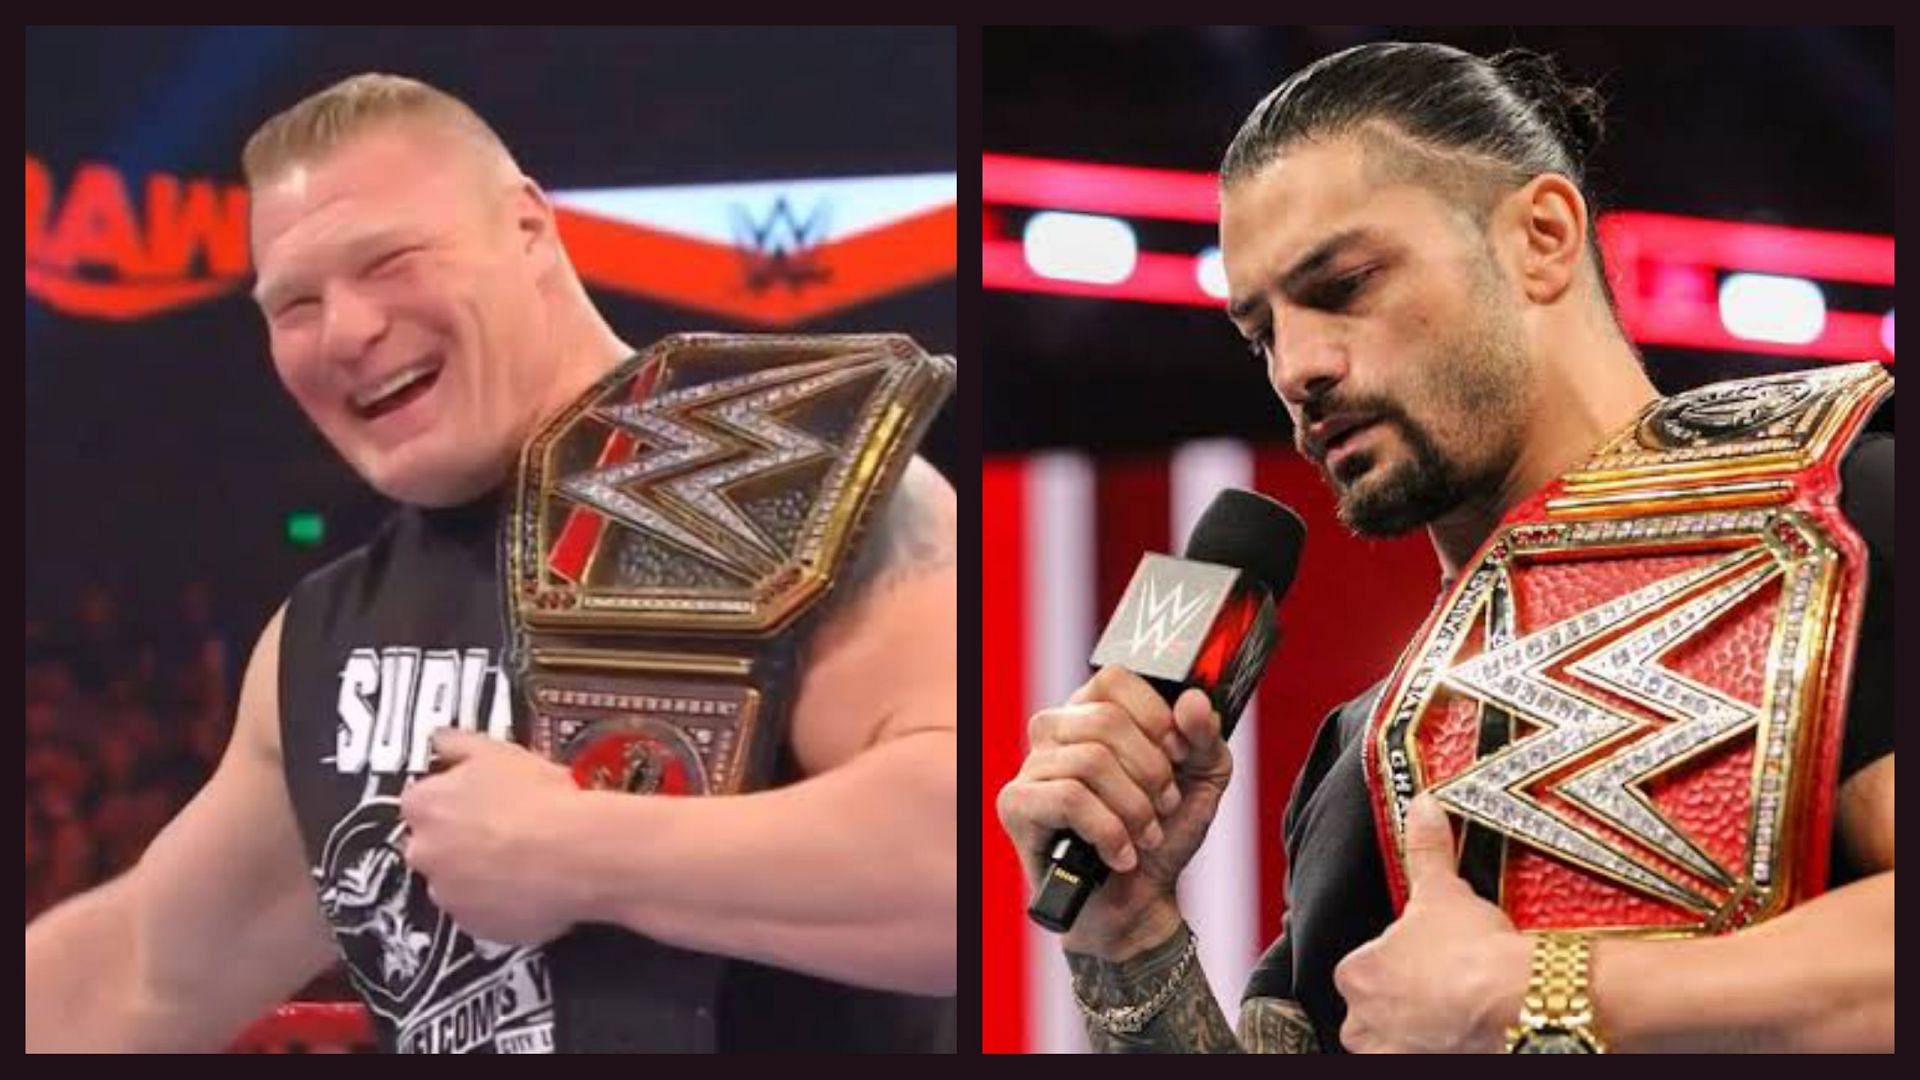 Both Brock Lesnar and Roman Reigns have showed their real self in WWE.